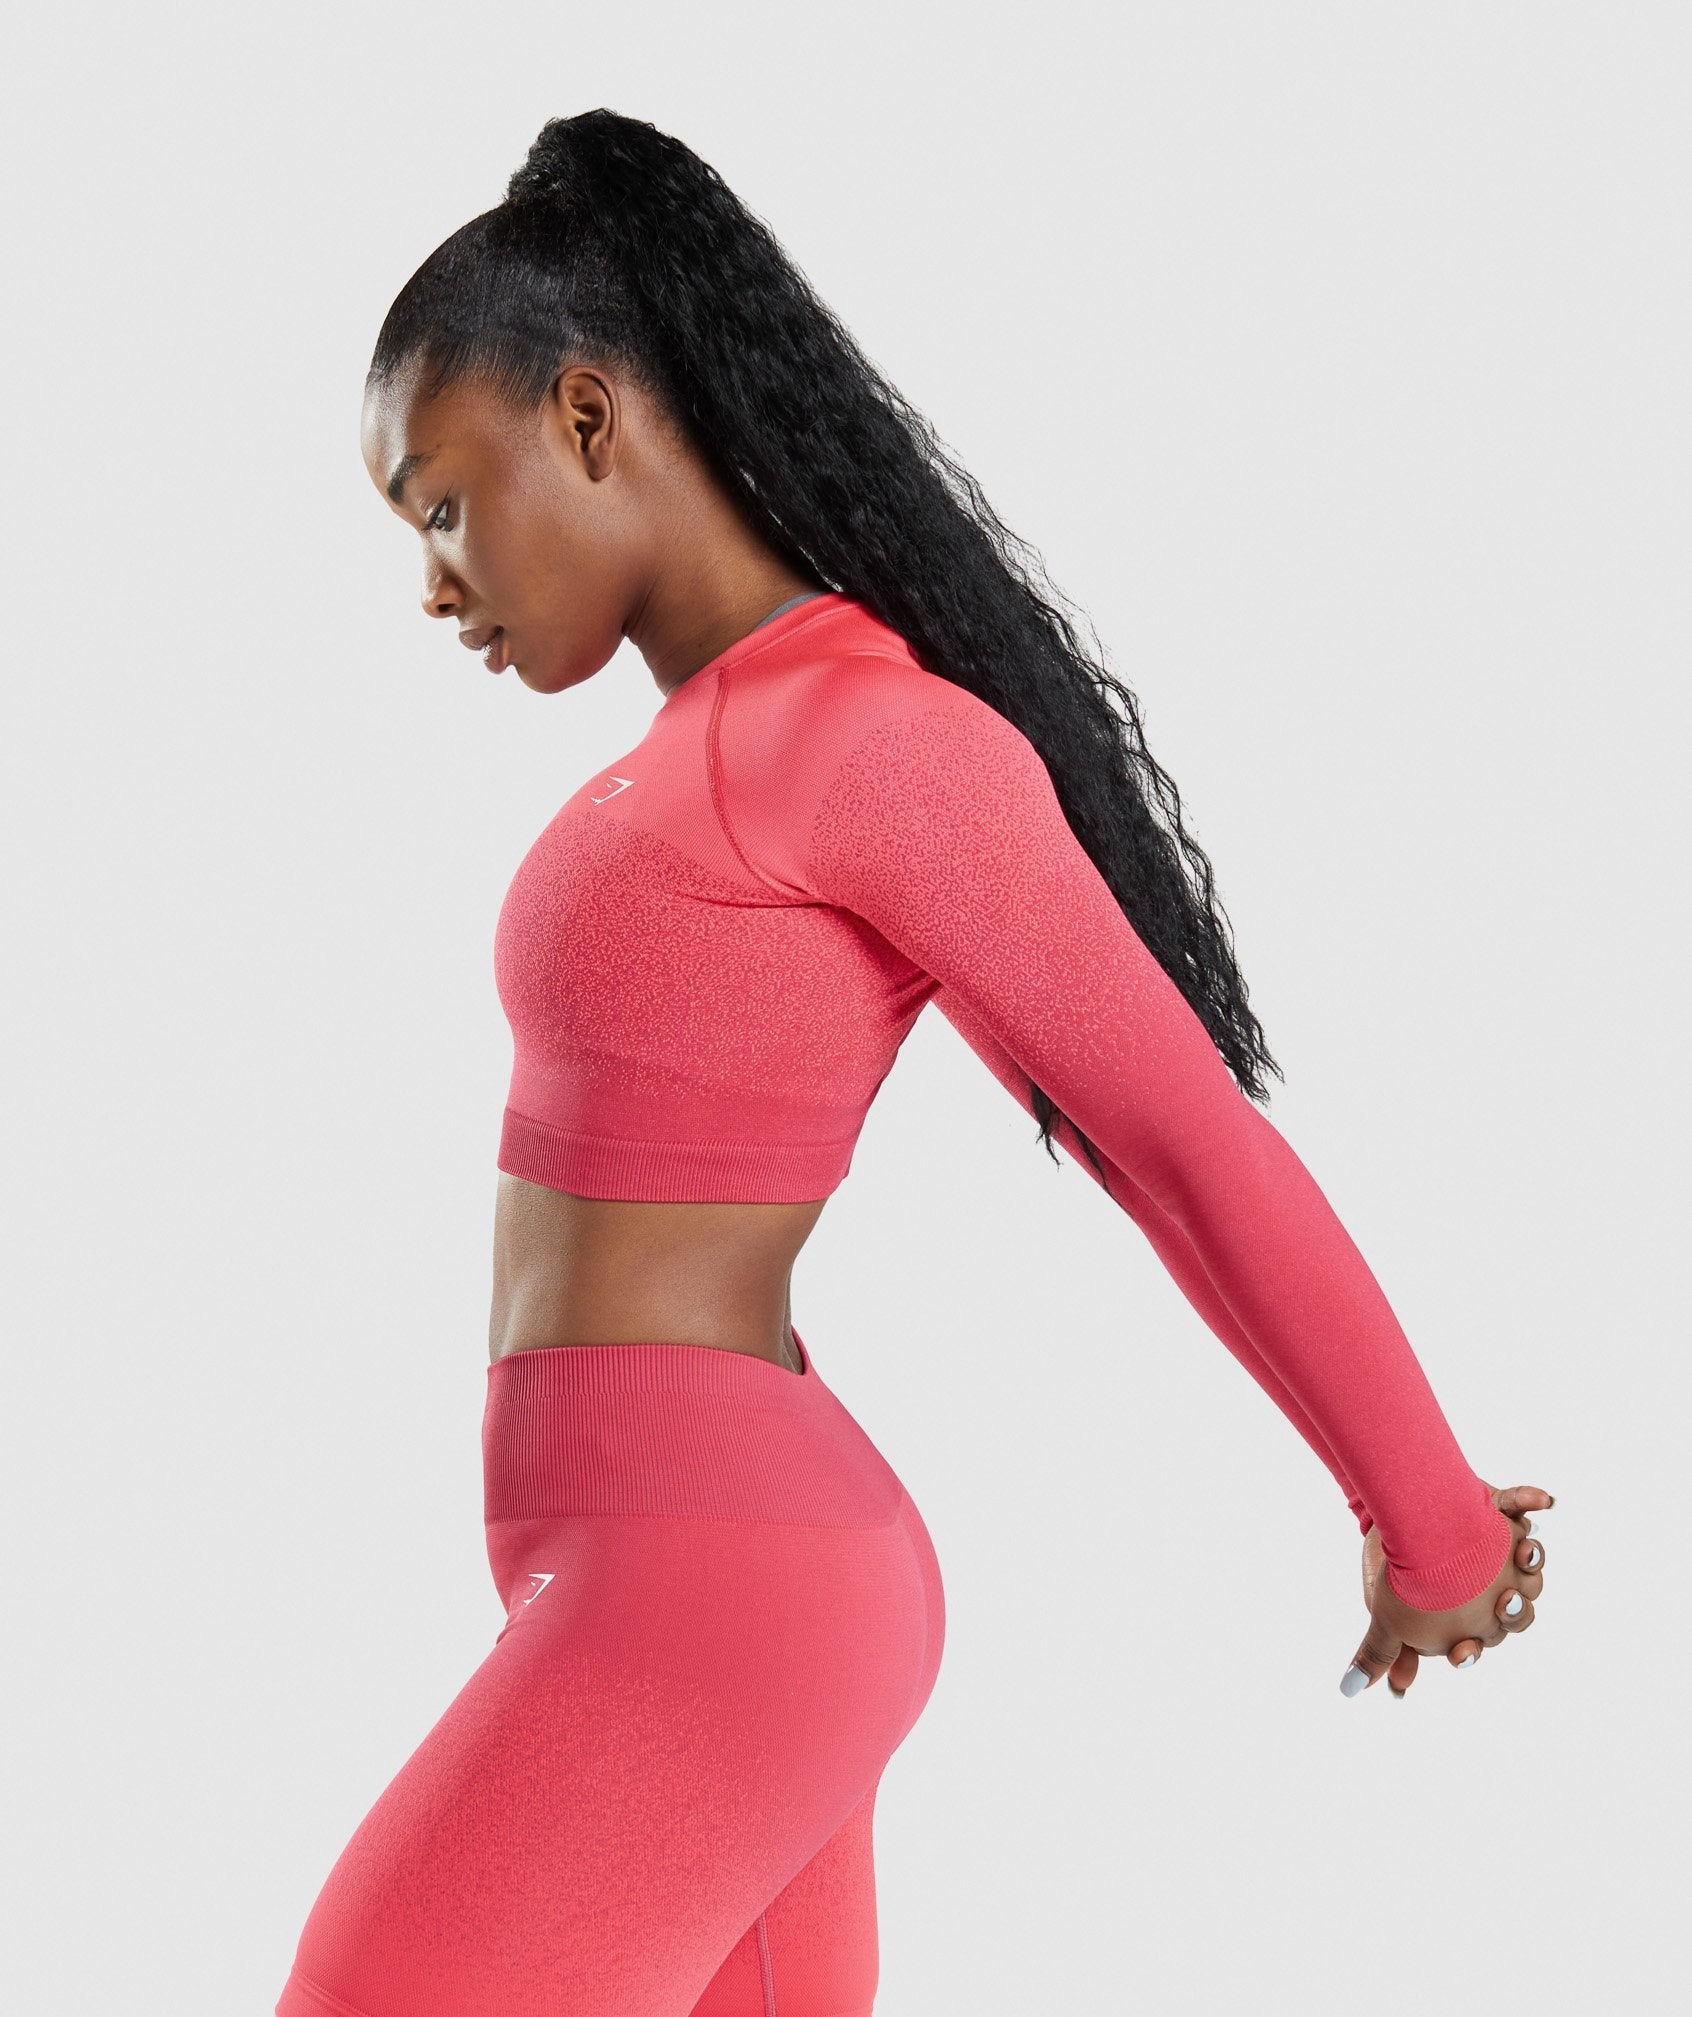 Adapt Ombre Seamless Long Sleeve Crop Top in Pink/Red - view 3